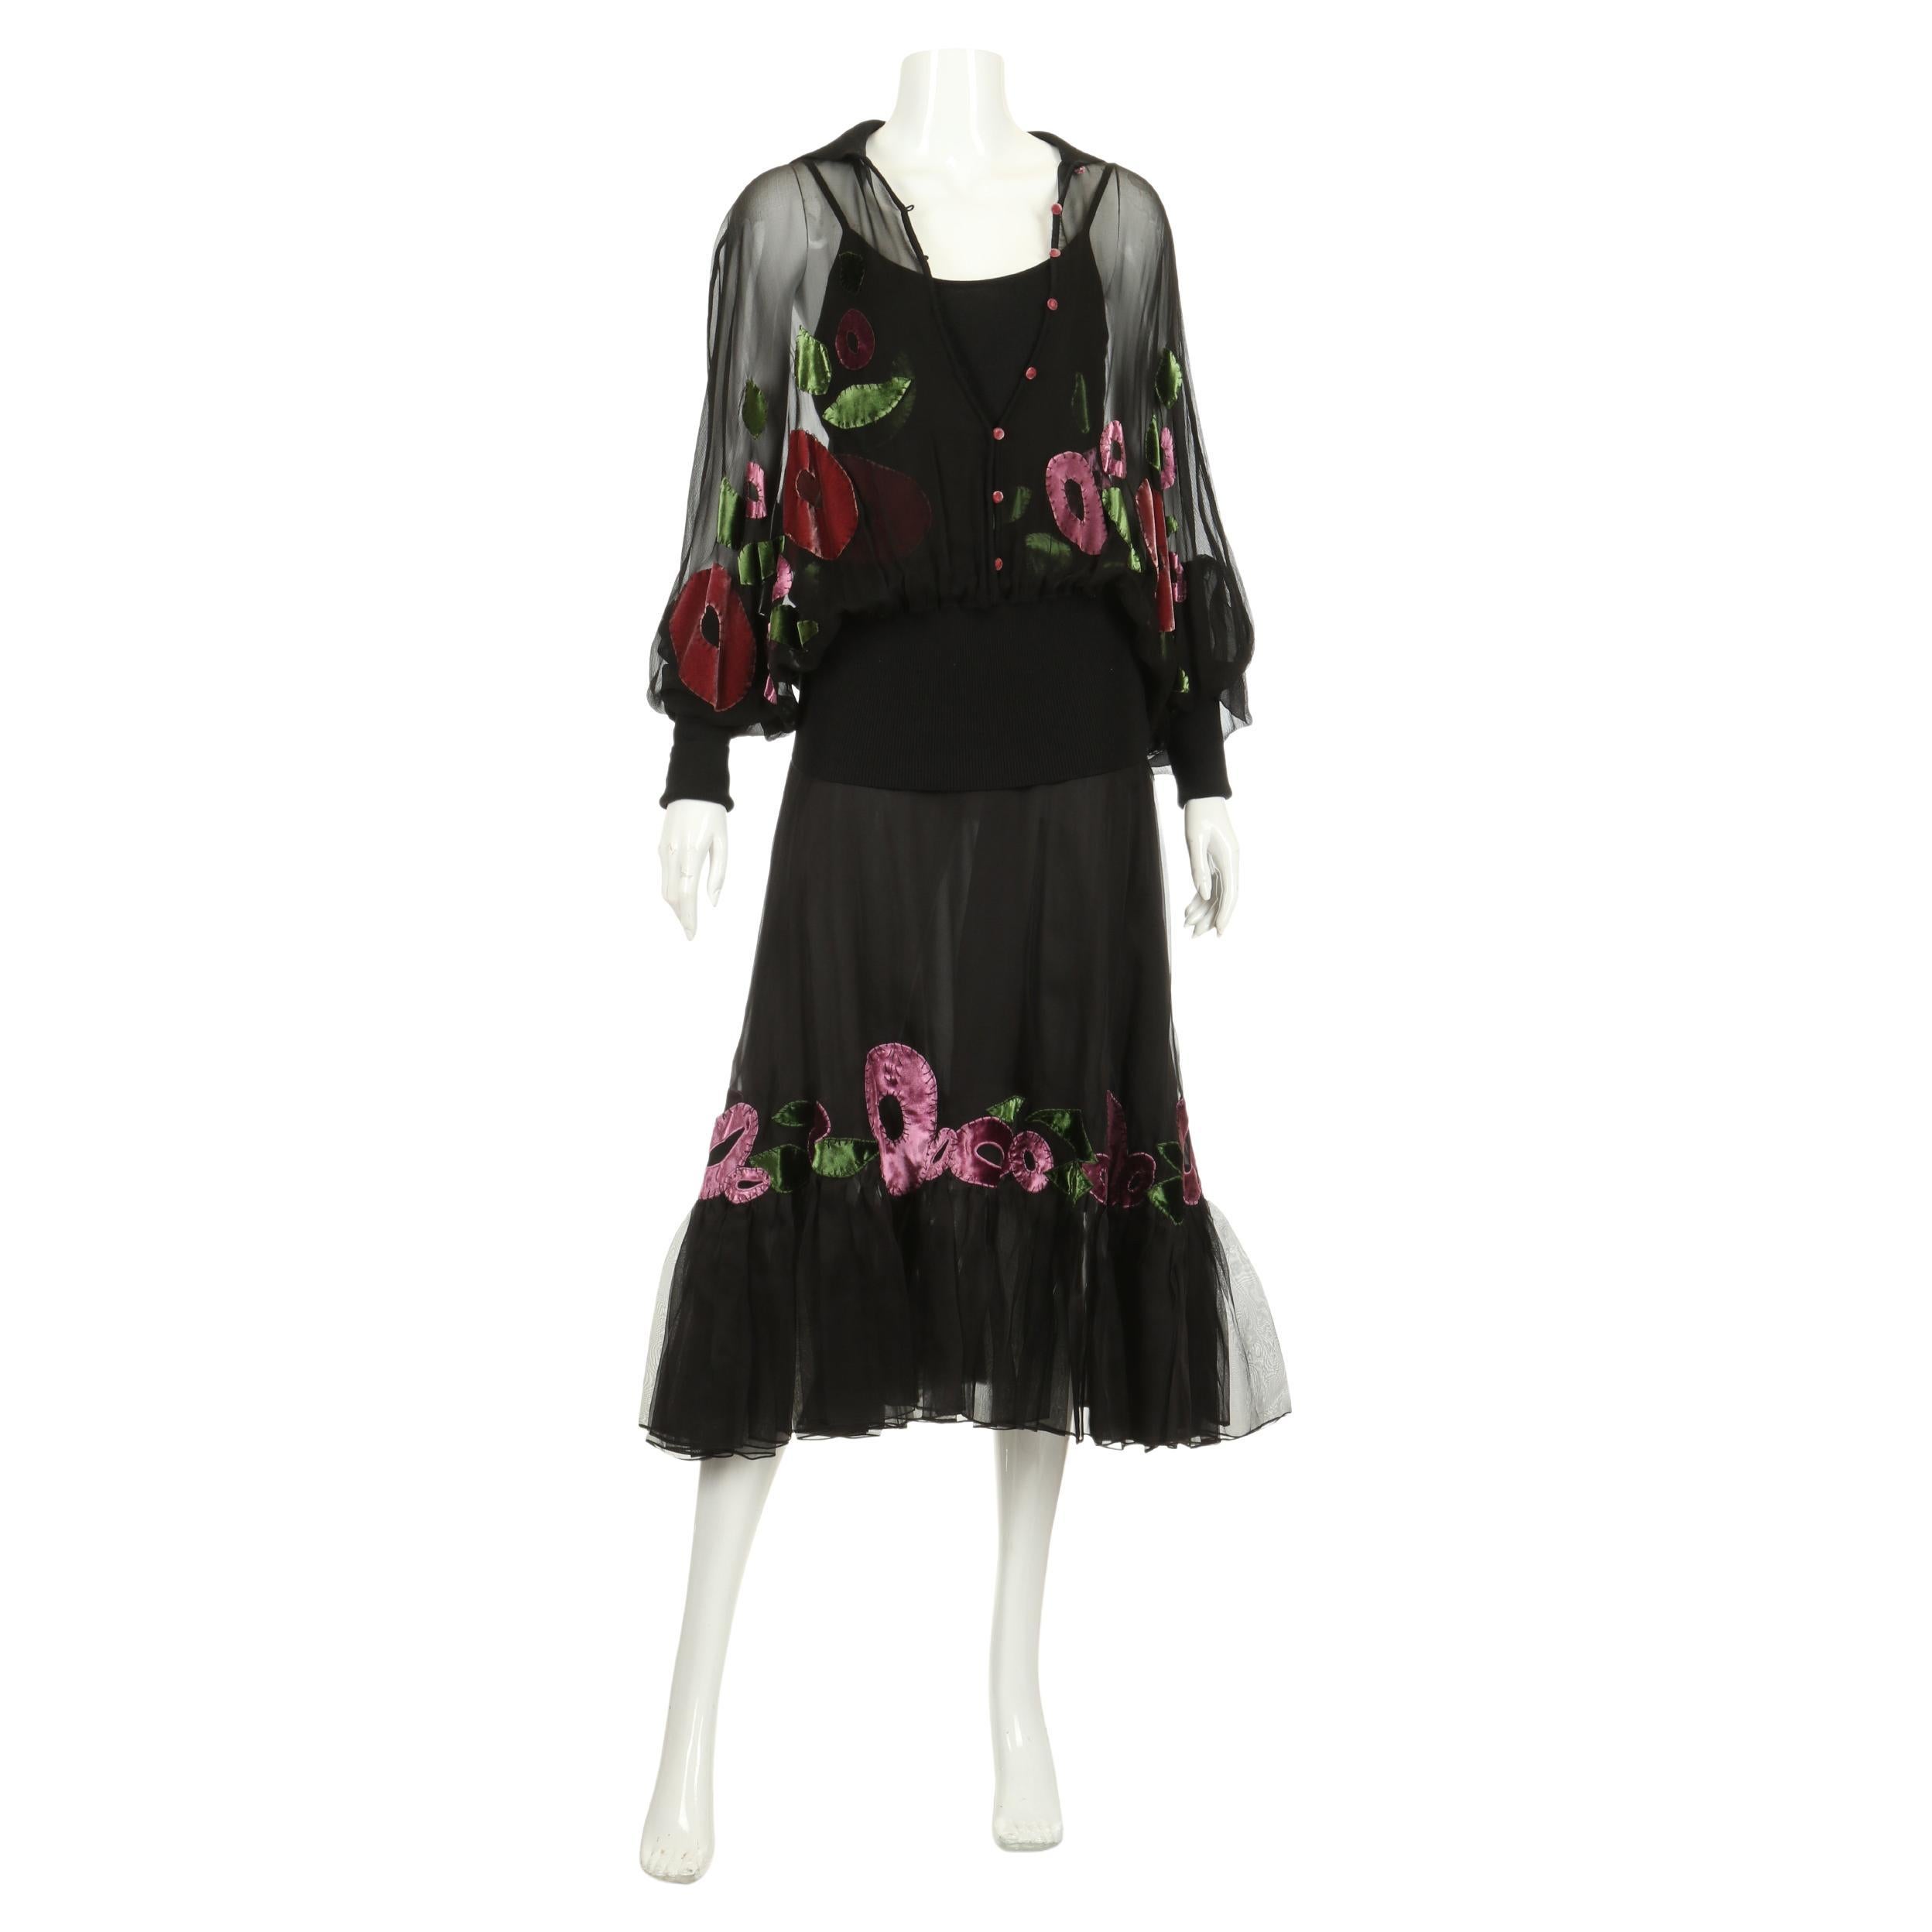 2002 Christian Dior by John Galliano 3-piece set - a skirt, camisole and blouse - with matching silk velvet abstract floral appliqués on each piece: a black silk organza ruffle trim skirt, a black  cashmere silk blend camisole and an oversized black